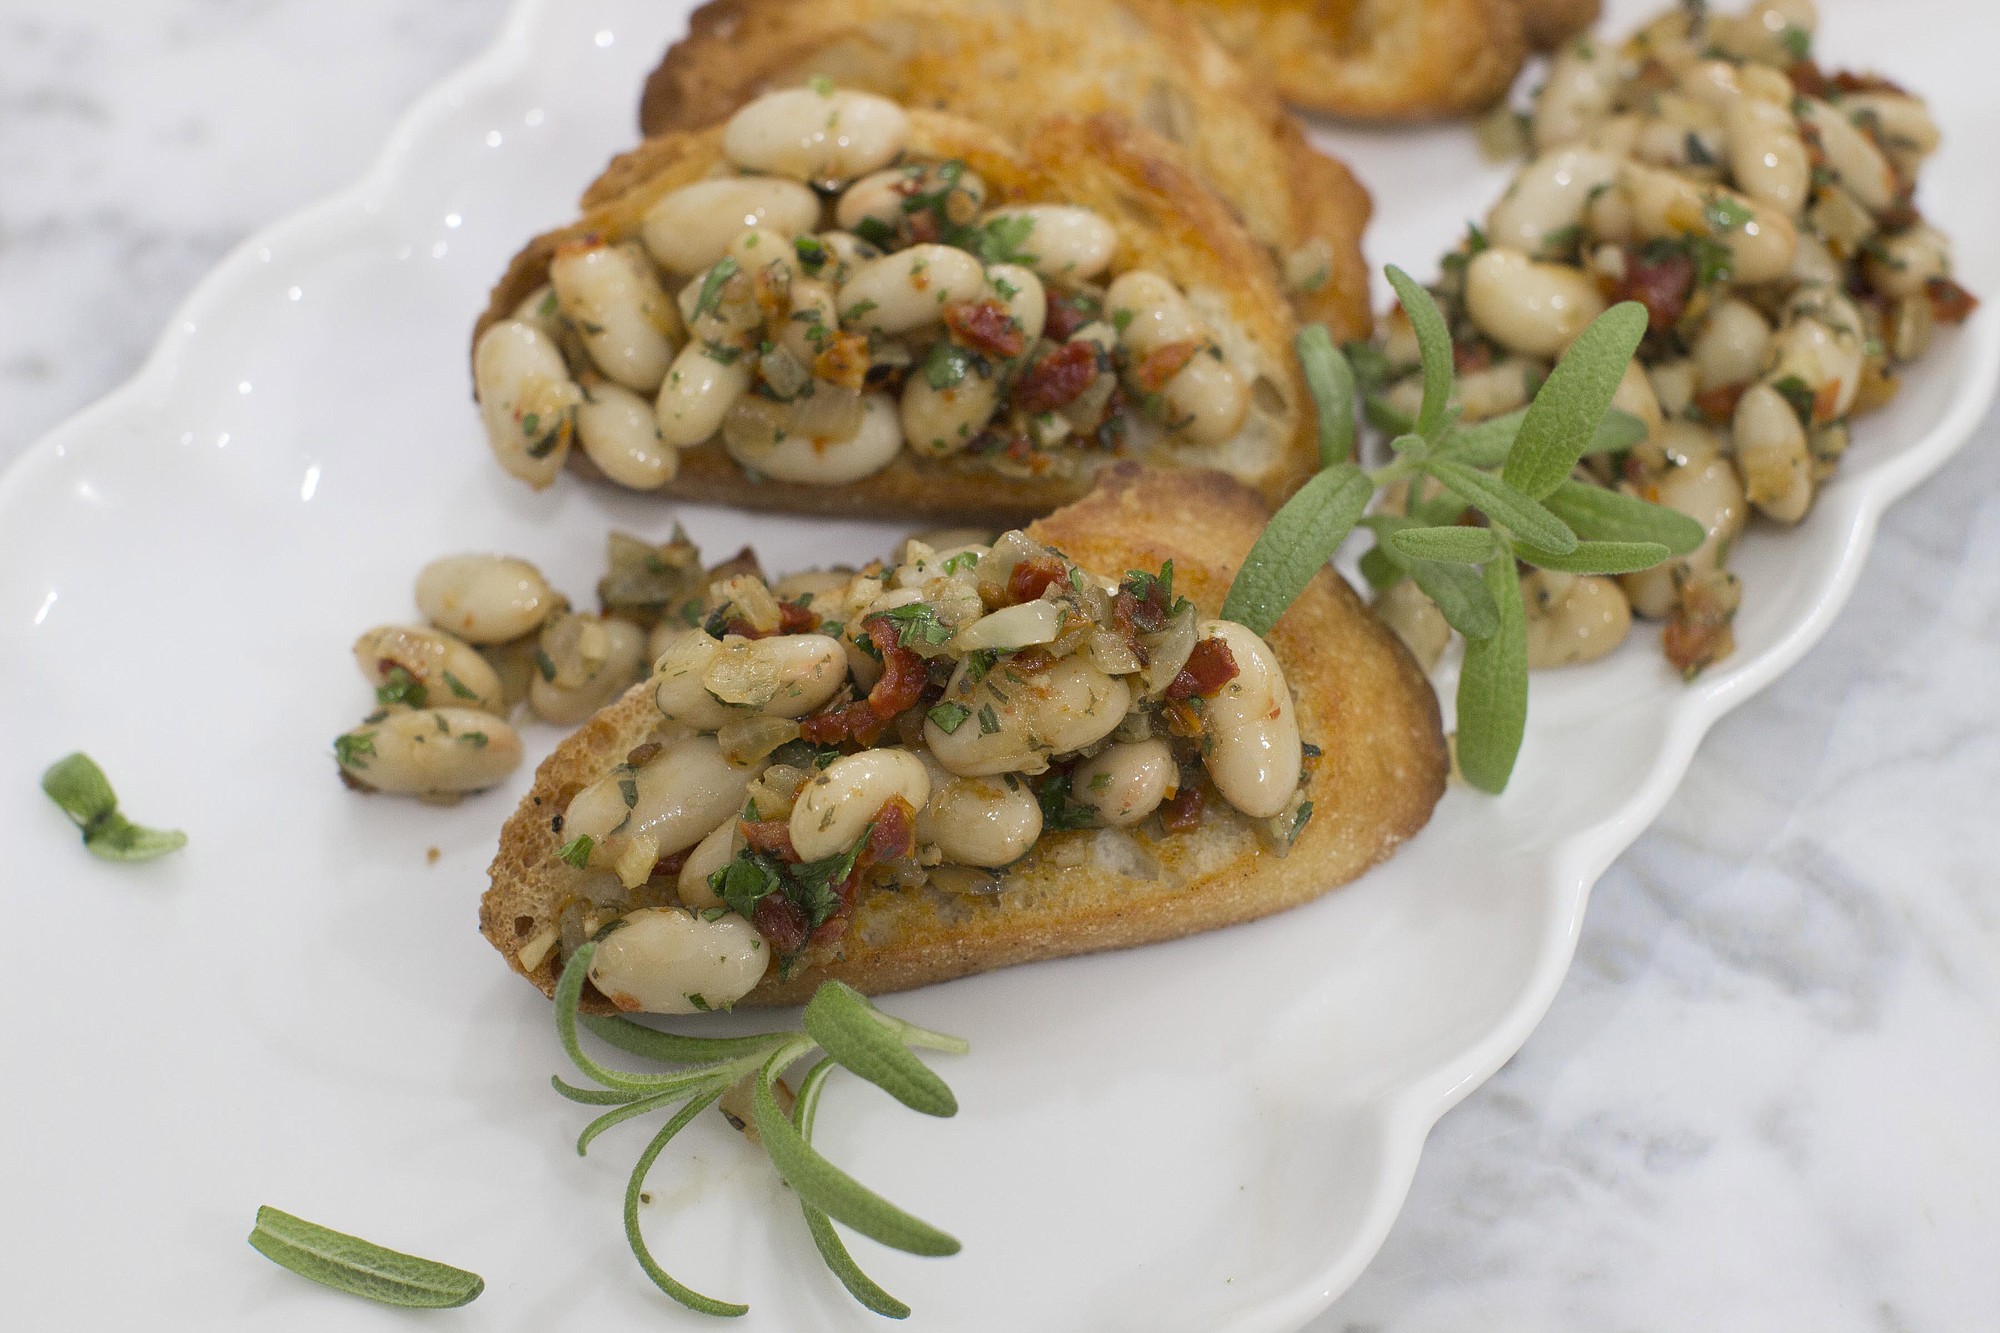 In Italy, a reliance on whole ingredients and bold flavors means there are plenty of small bites -- such as this Winter White Bean Bruschetta.